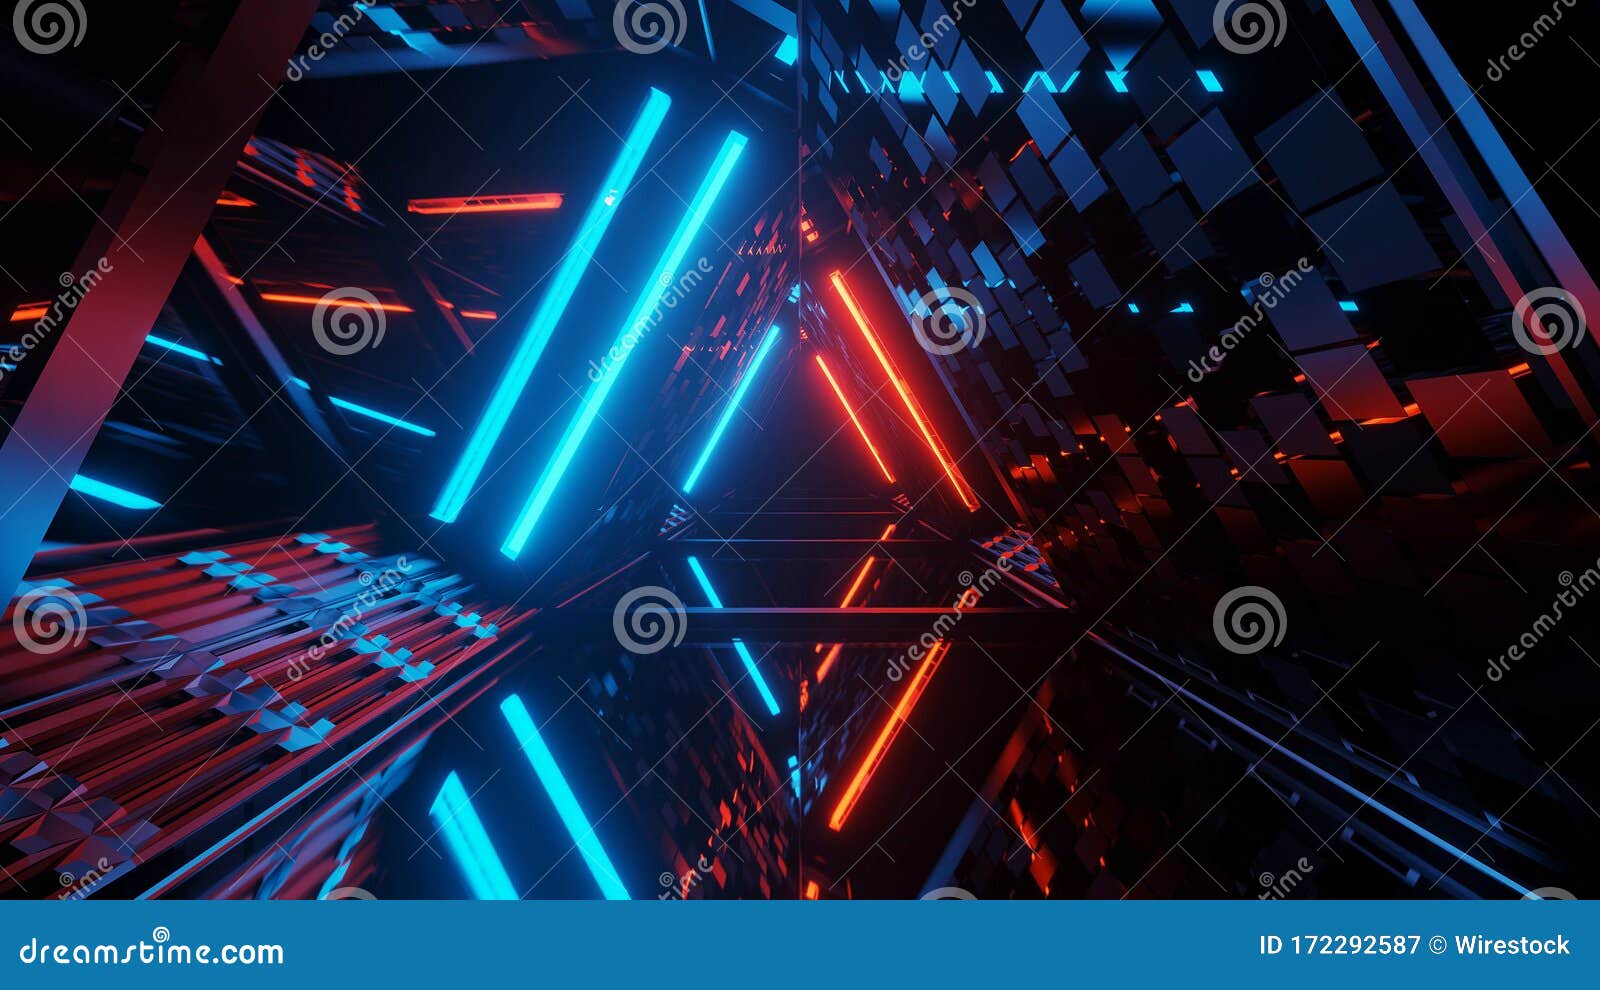 Cool Geometric Triangular Figure in a Neon Laser Light - Great for  Backgrounds and Wallpapers Stock Illustration - Illustration of wallpaper,  triangular: 172292587